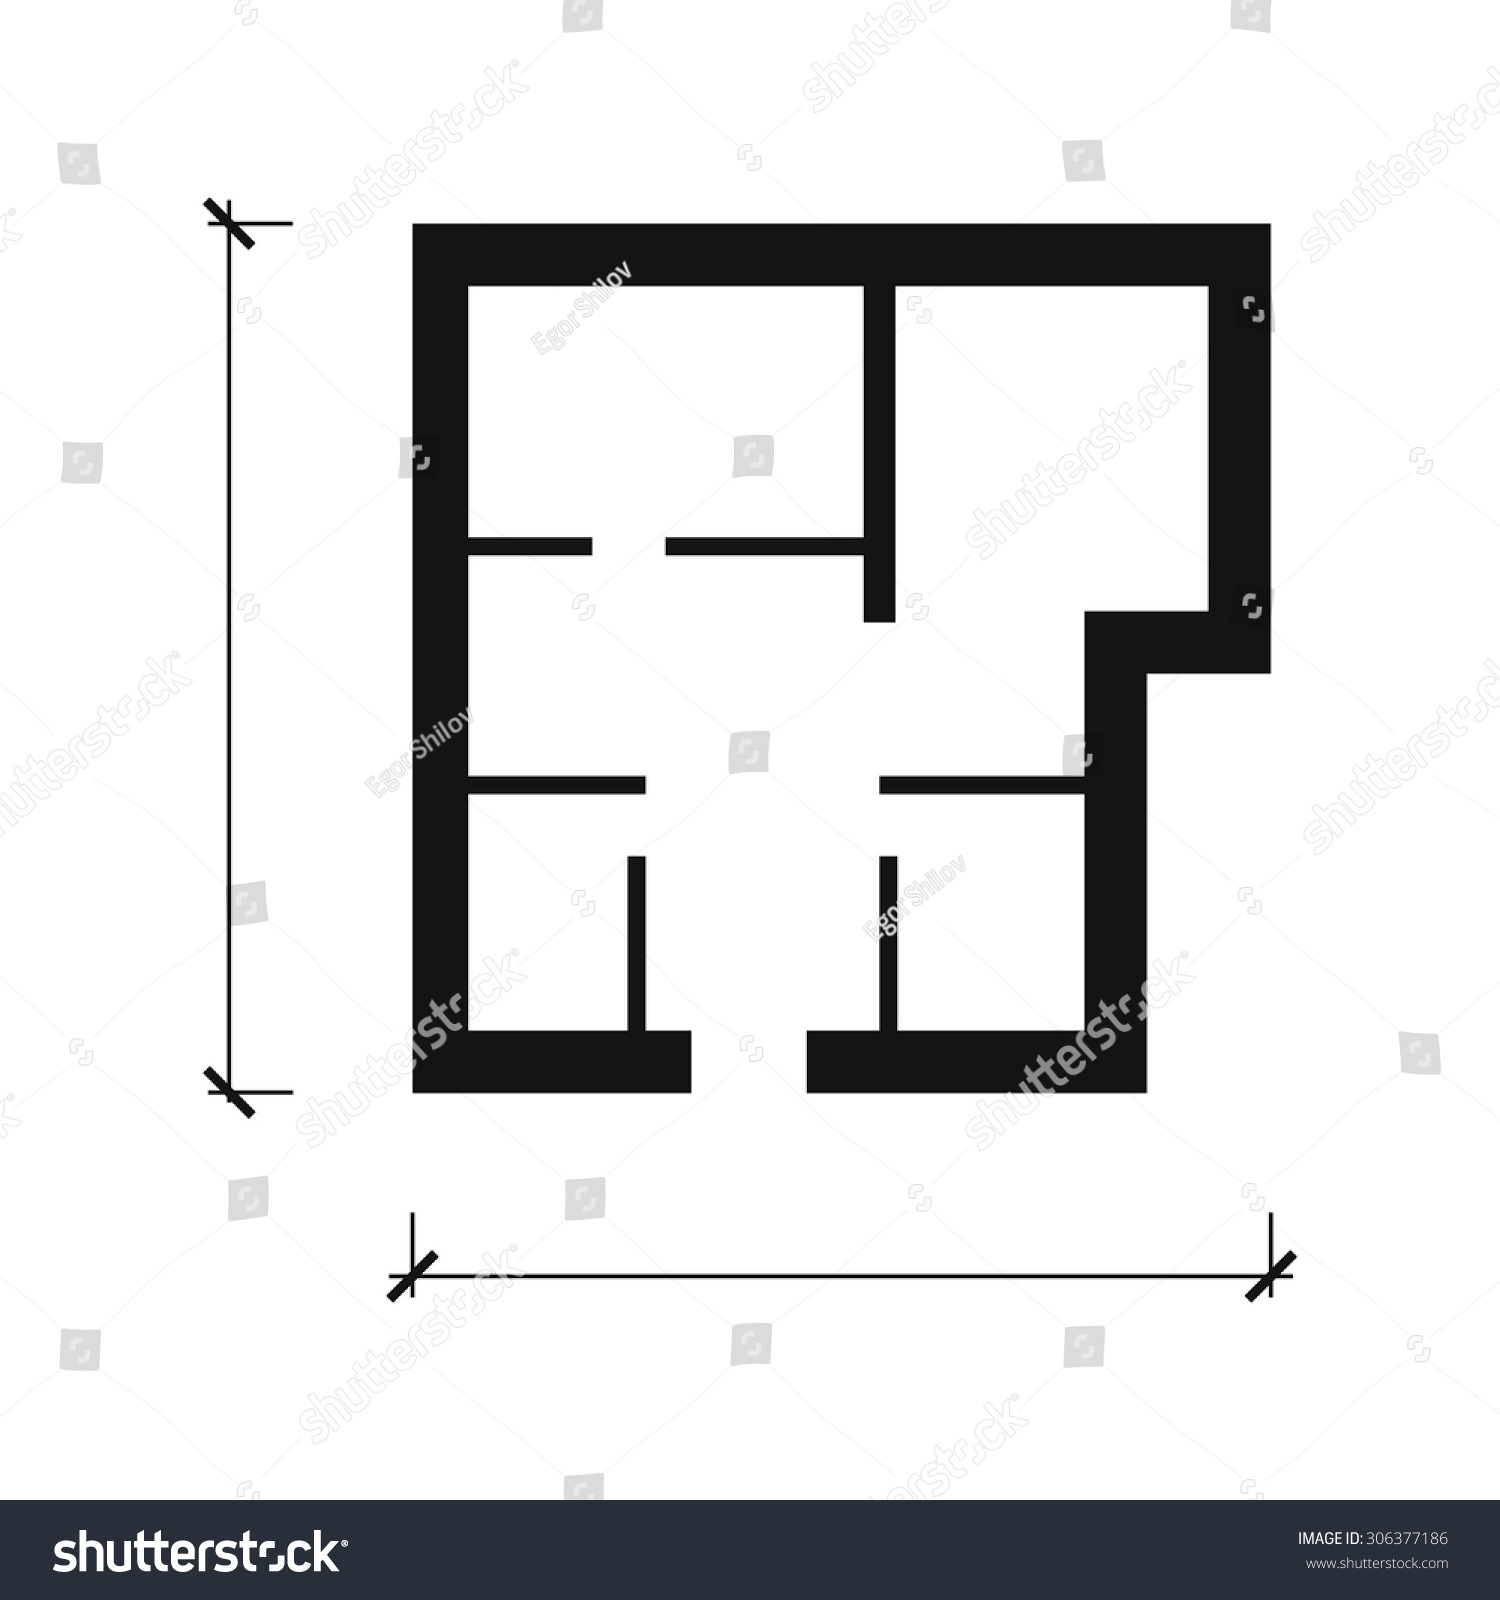 free clipart house plans - photo #12